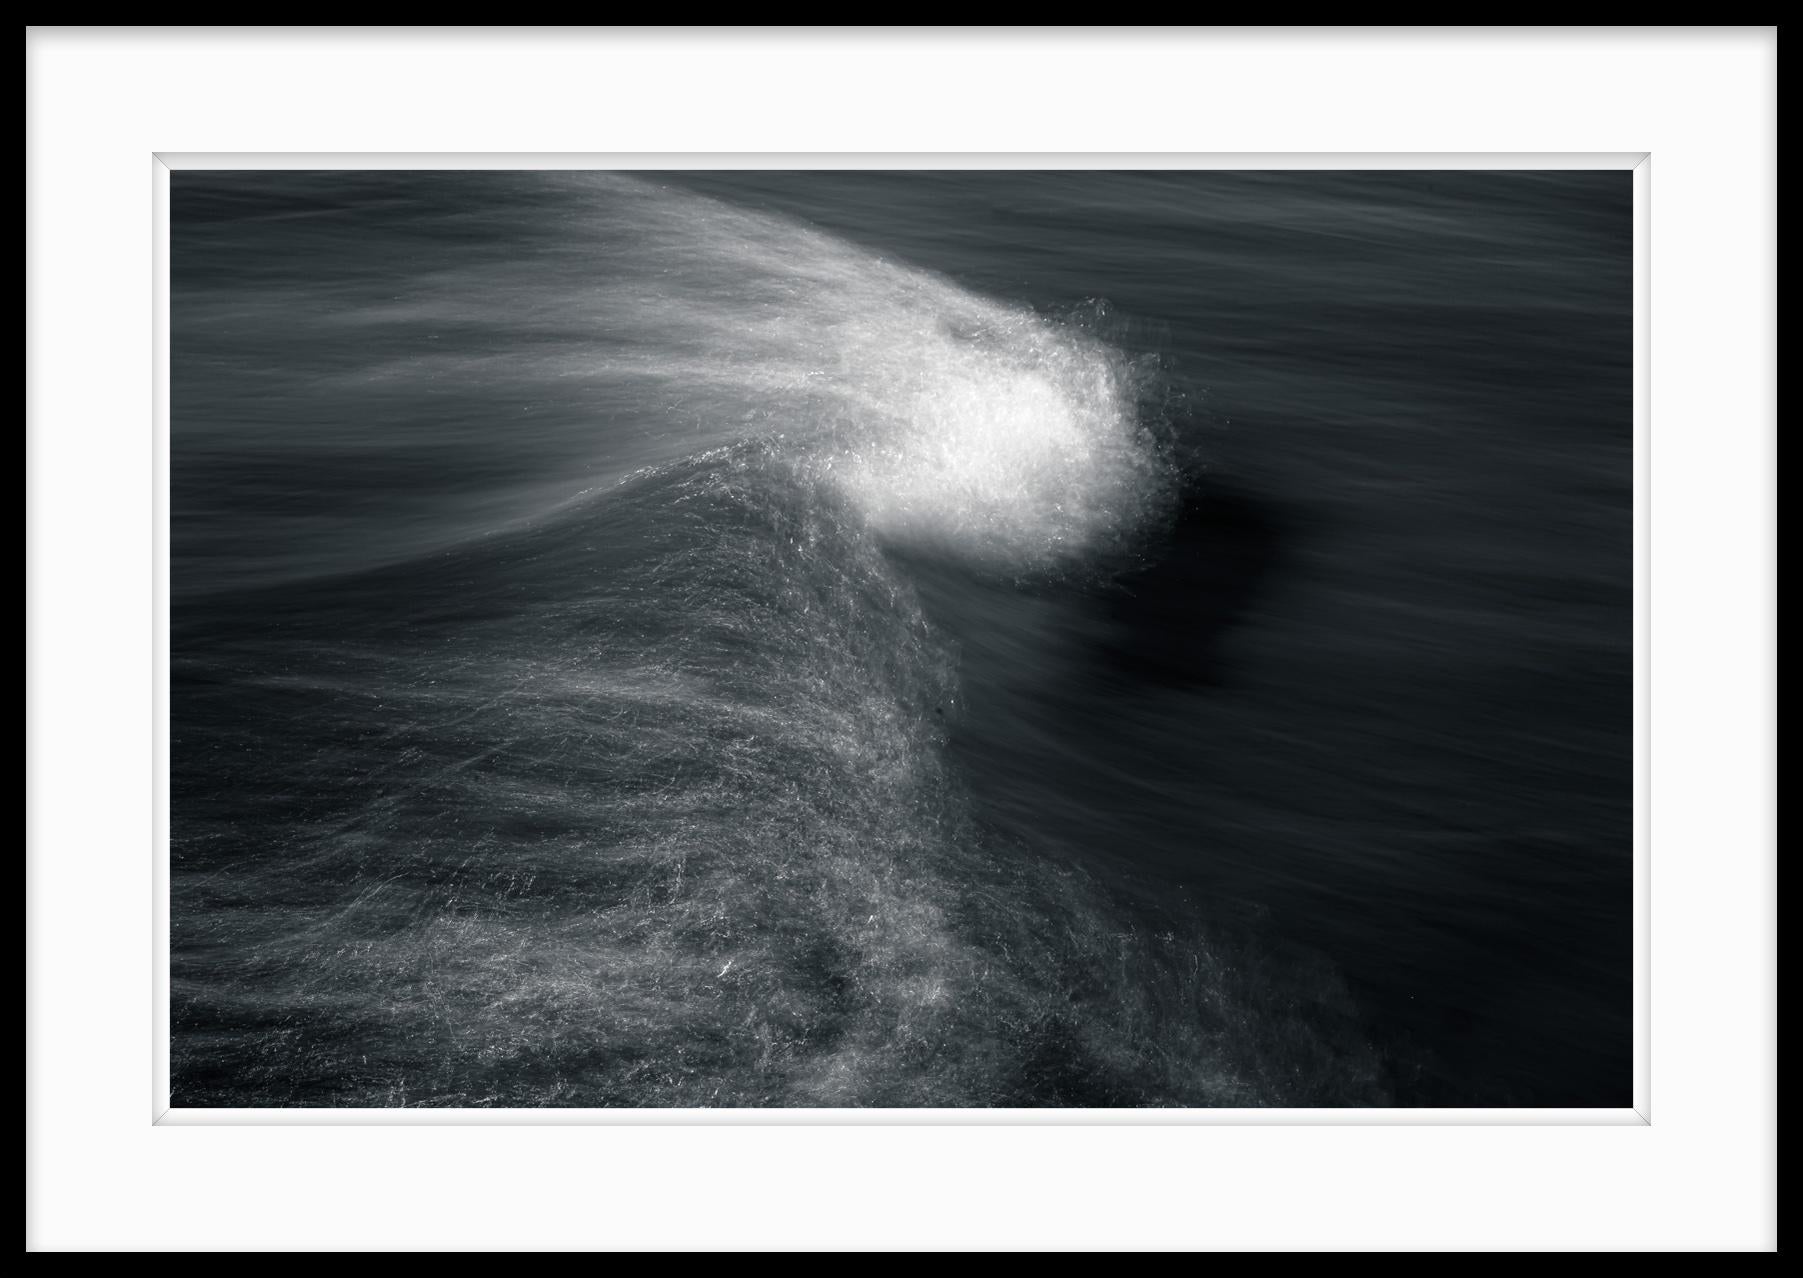 Limited Edition Black and White Lewis Photograph Water, Ocean - 2015.  This is Untitled #12 from the Kinetic Solitude series. Kinetic Solitude has been exhibited in the Dow museum as part of their 